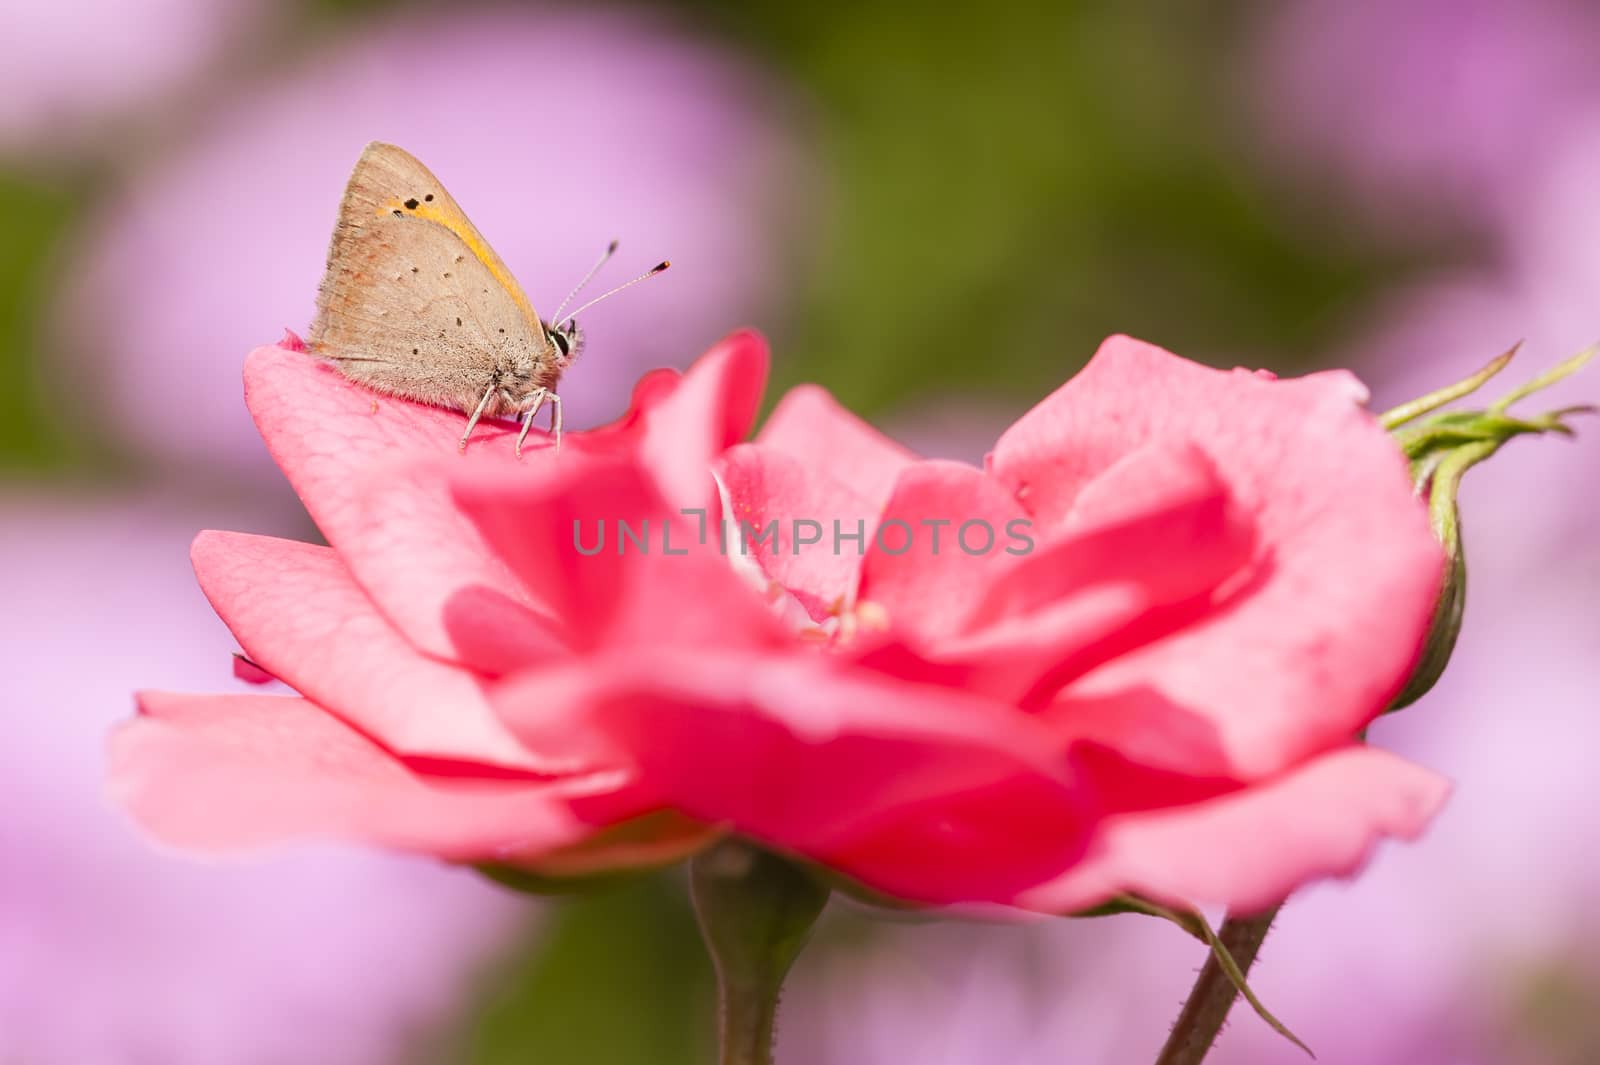 Smal butterfly resting on petal of pink rose flower